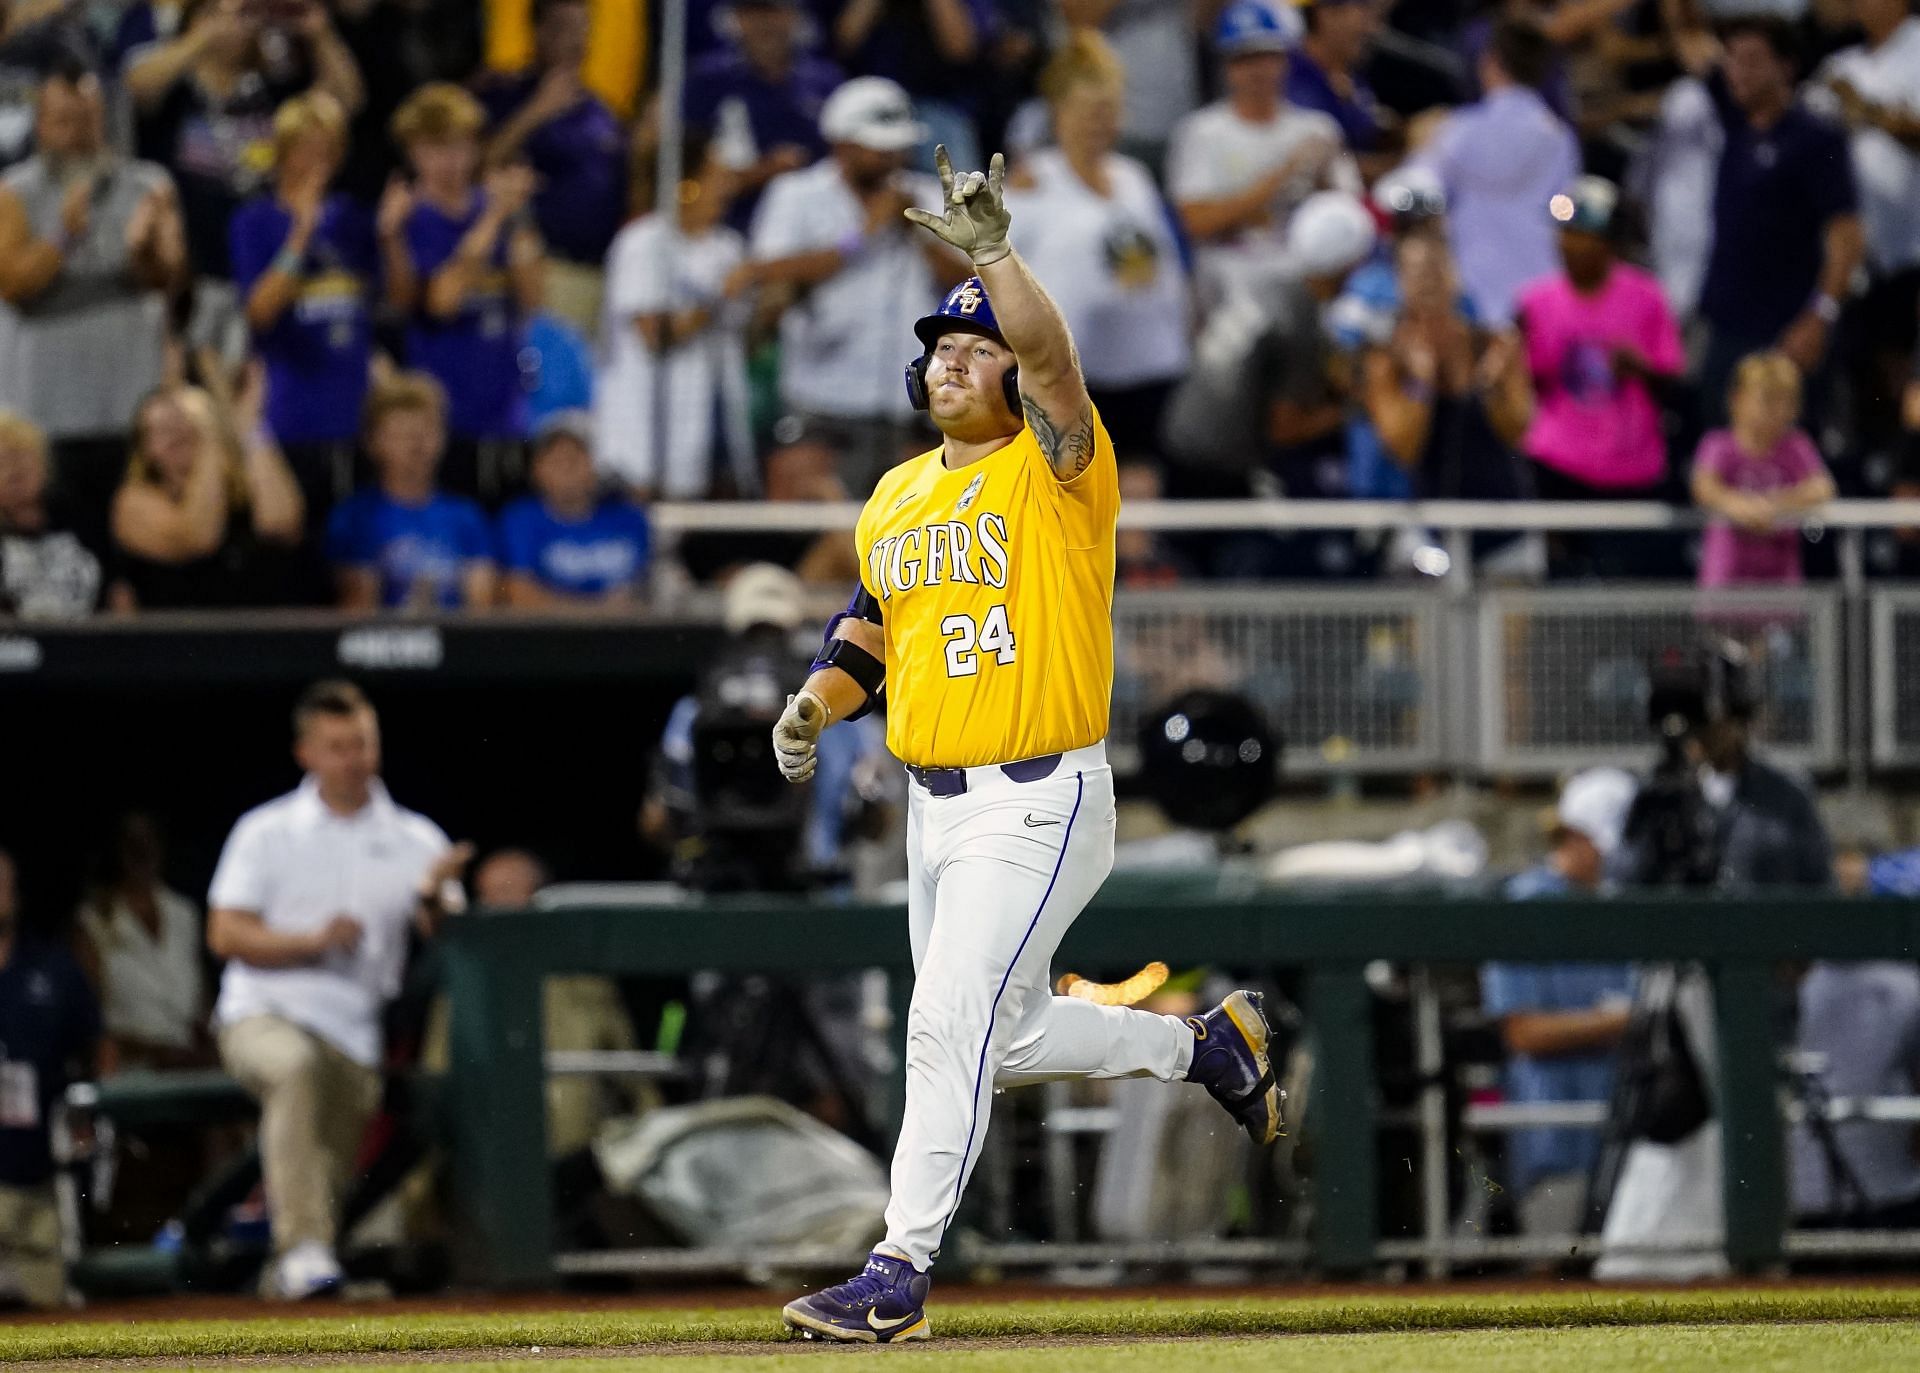 How to watch LSU Tigers vs Florida Gators Game 2 College World Series